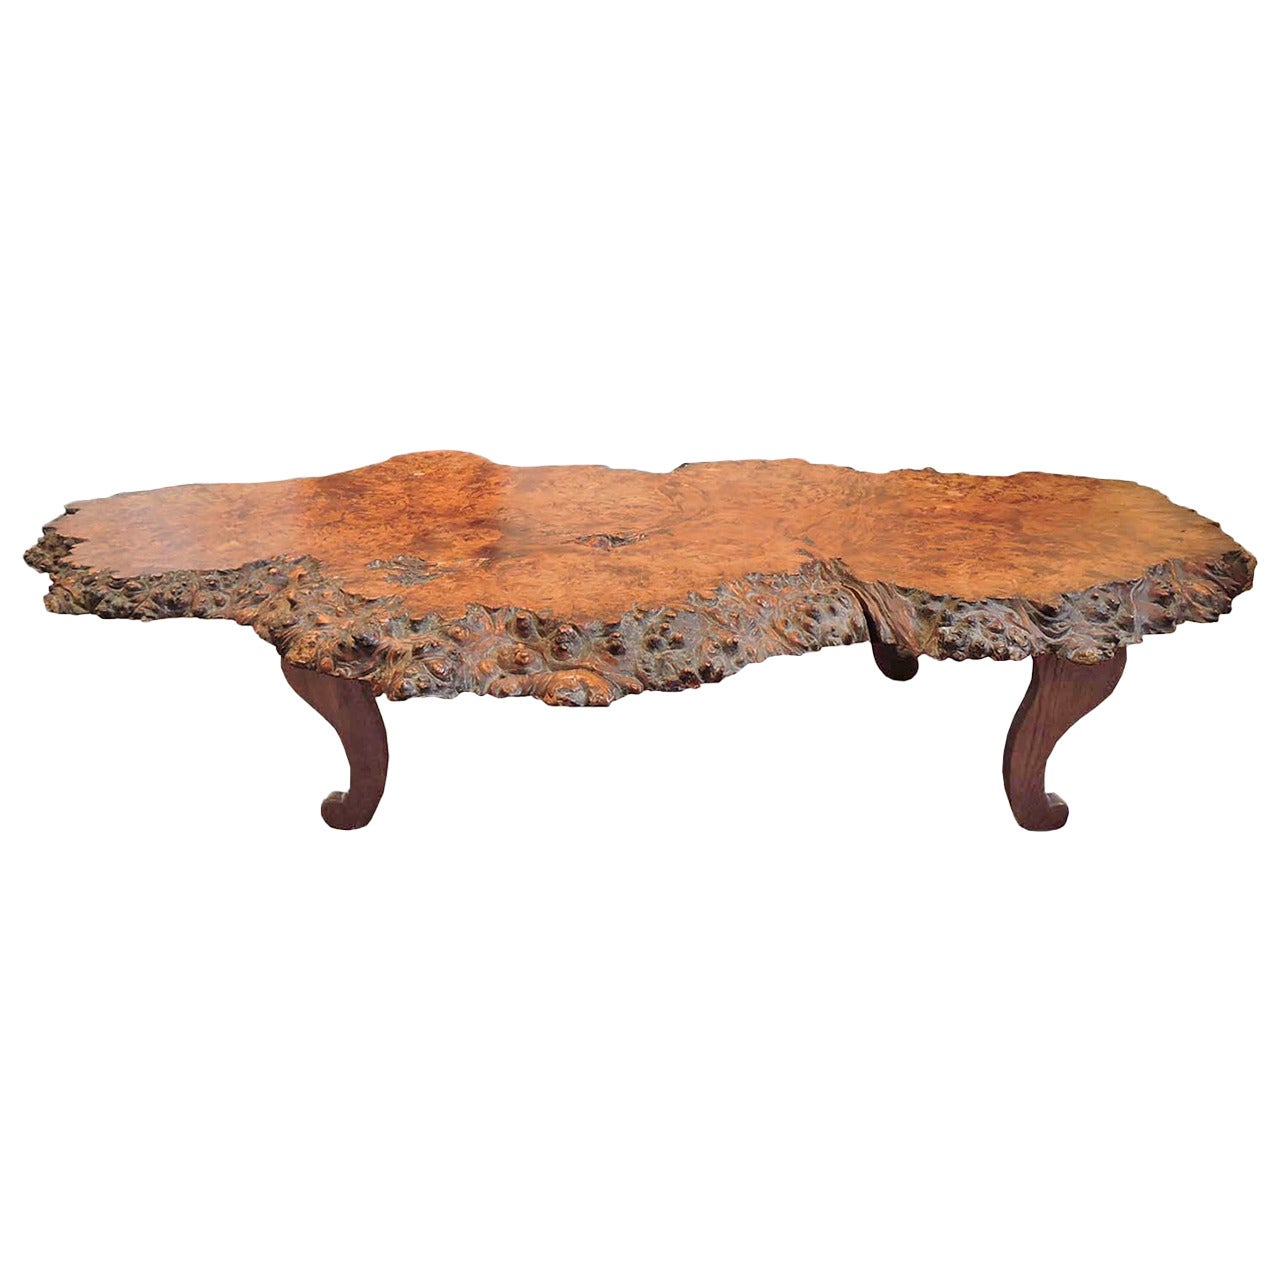 Antique Solid Burl Redwood Coffee Table